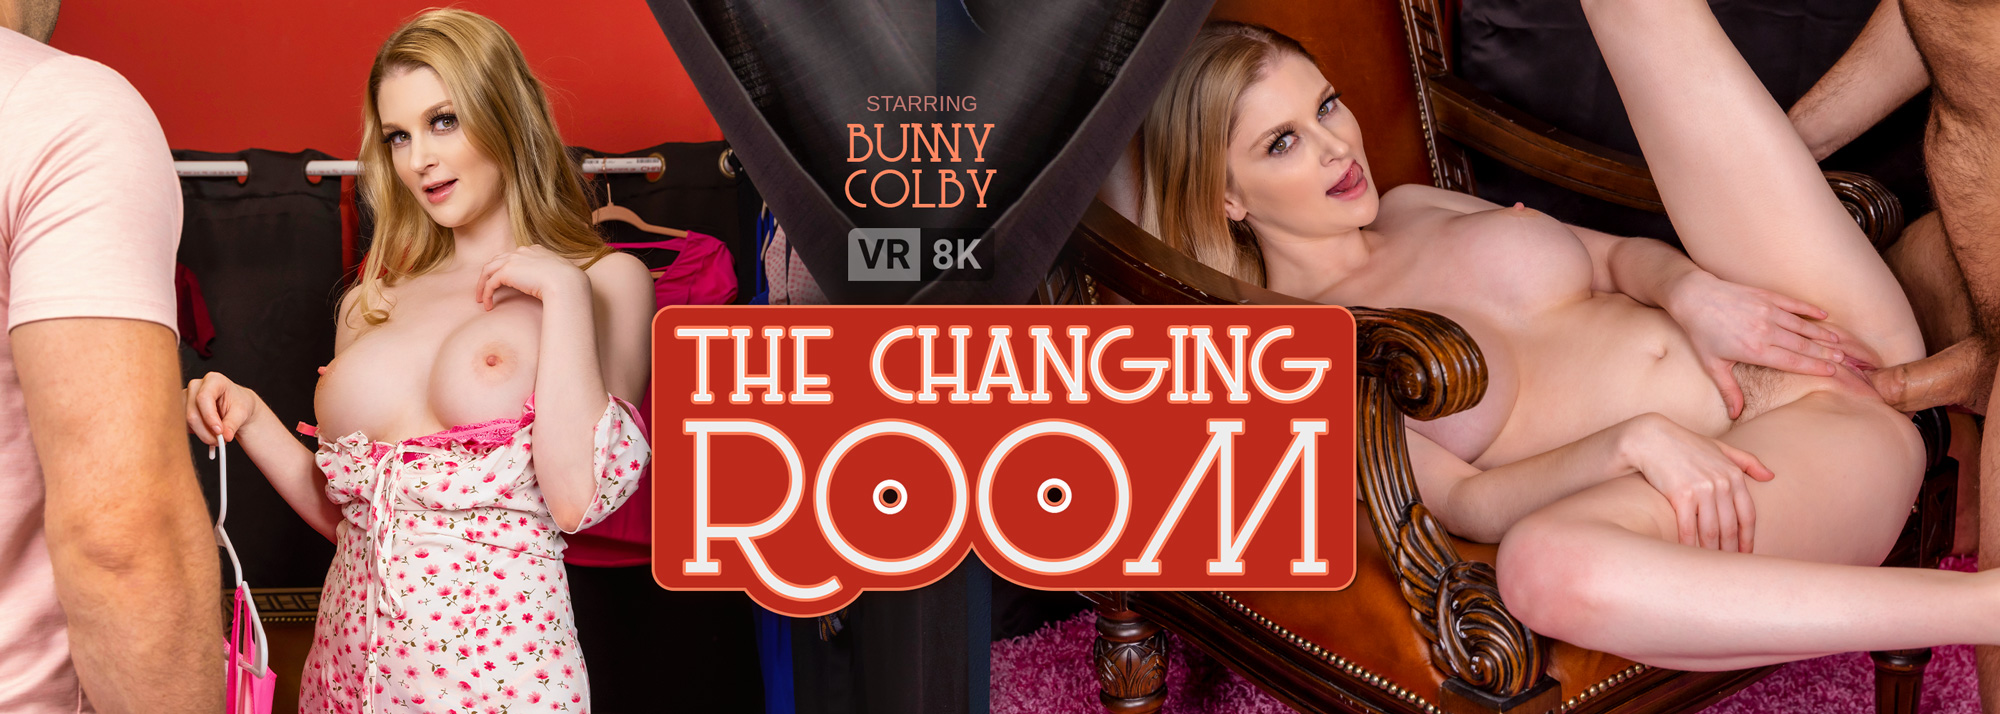 The Changing Room - VR Porn Video, Starring: Bunny Colby